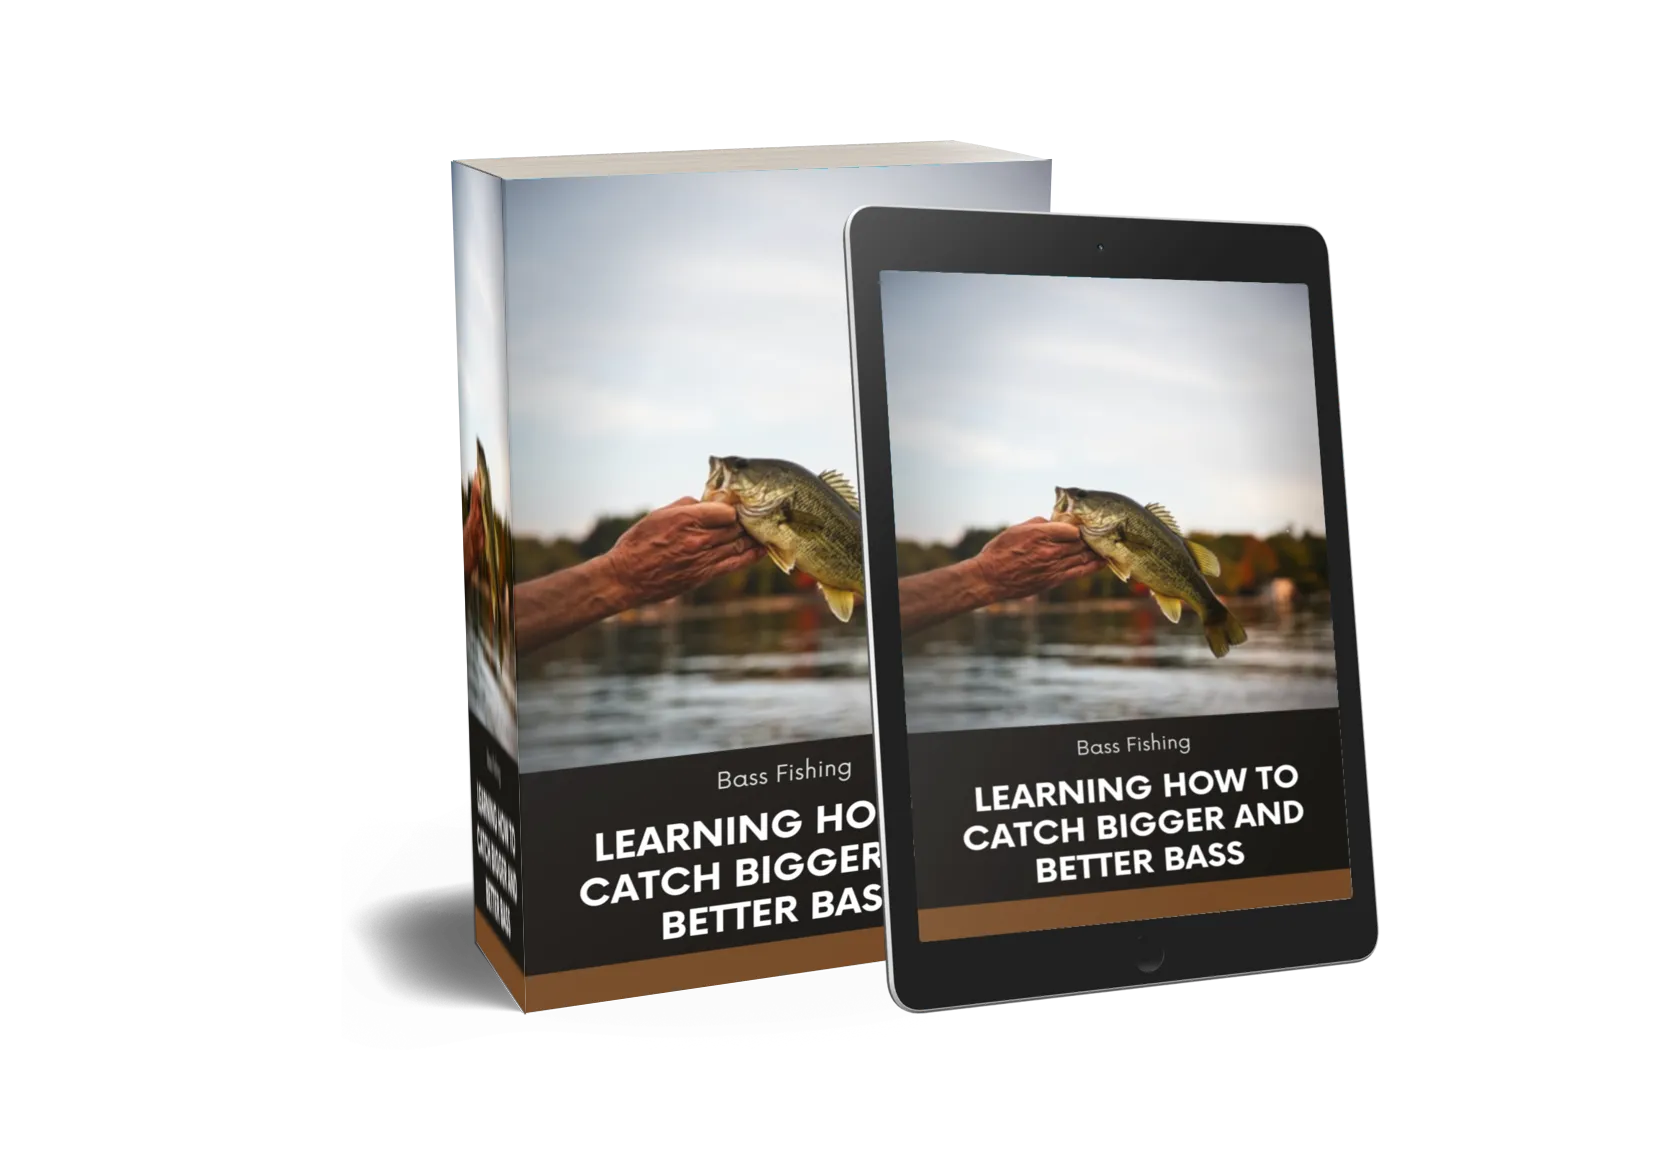 Bass Fishing: Learning How To Catch Bigger And Better Bass